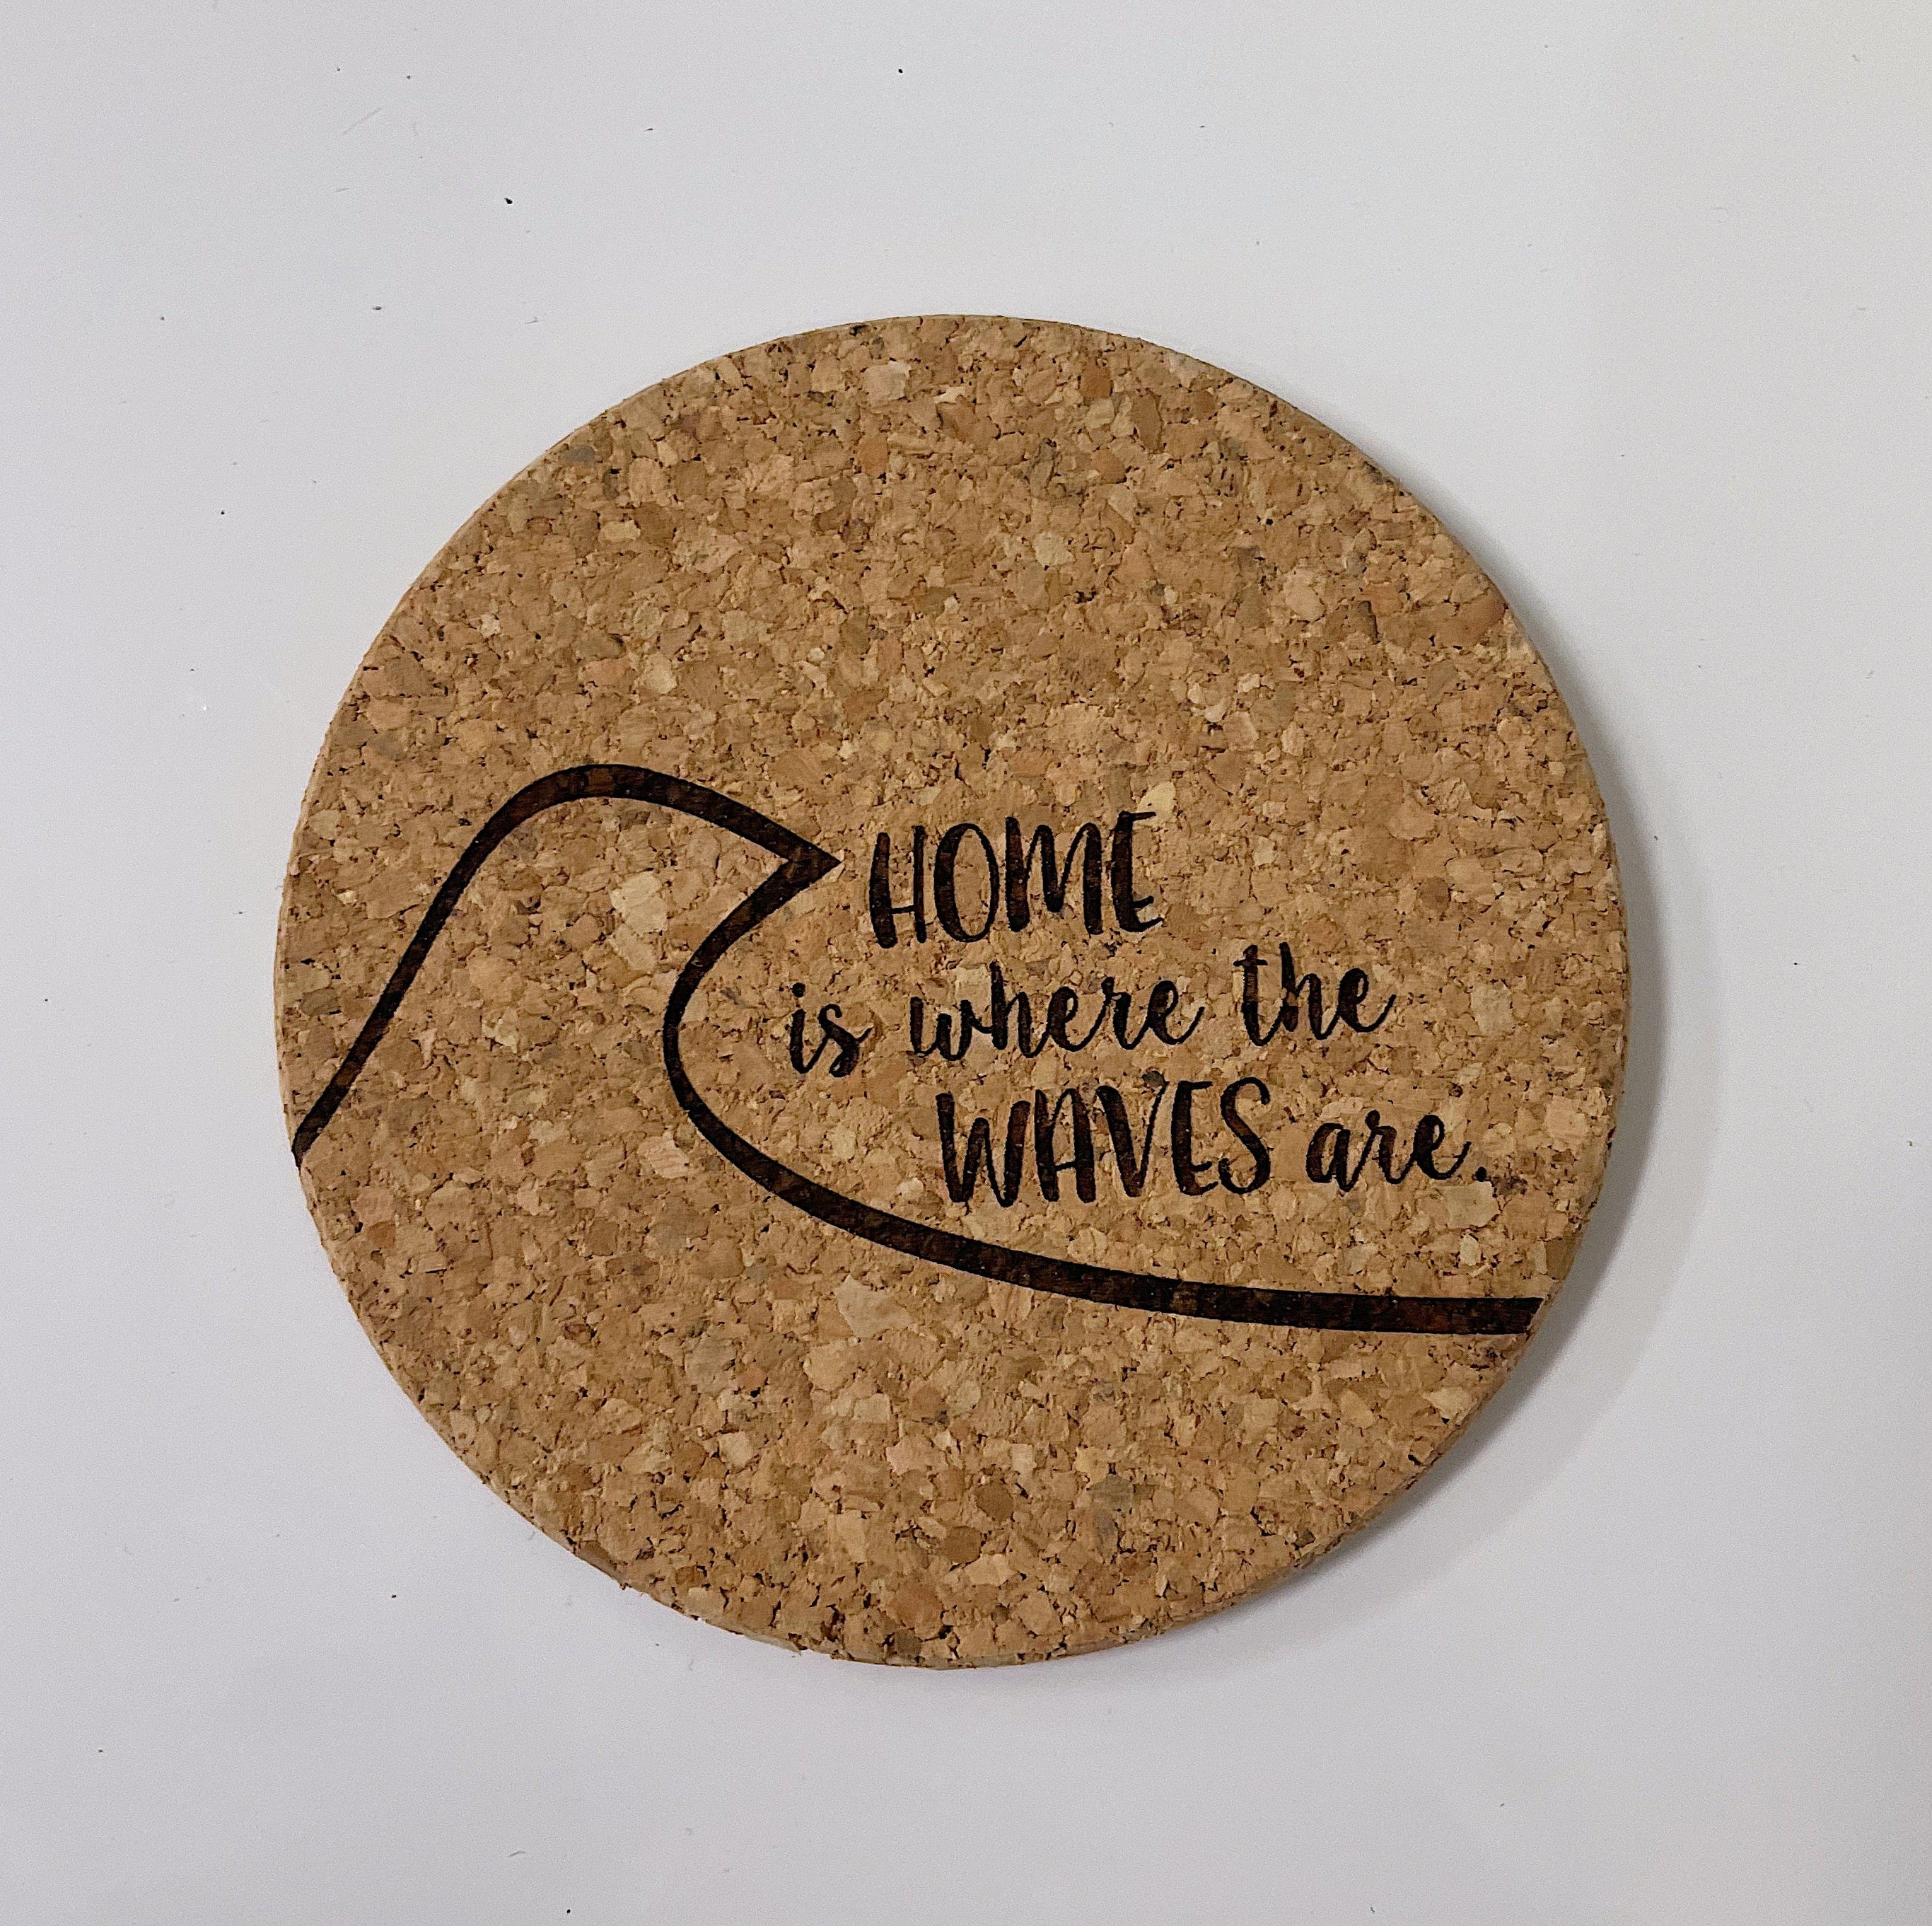 Cork Coaster in Home is Where the Waves are